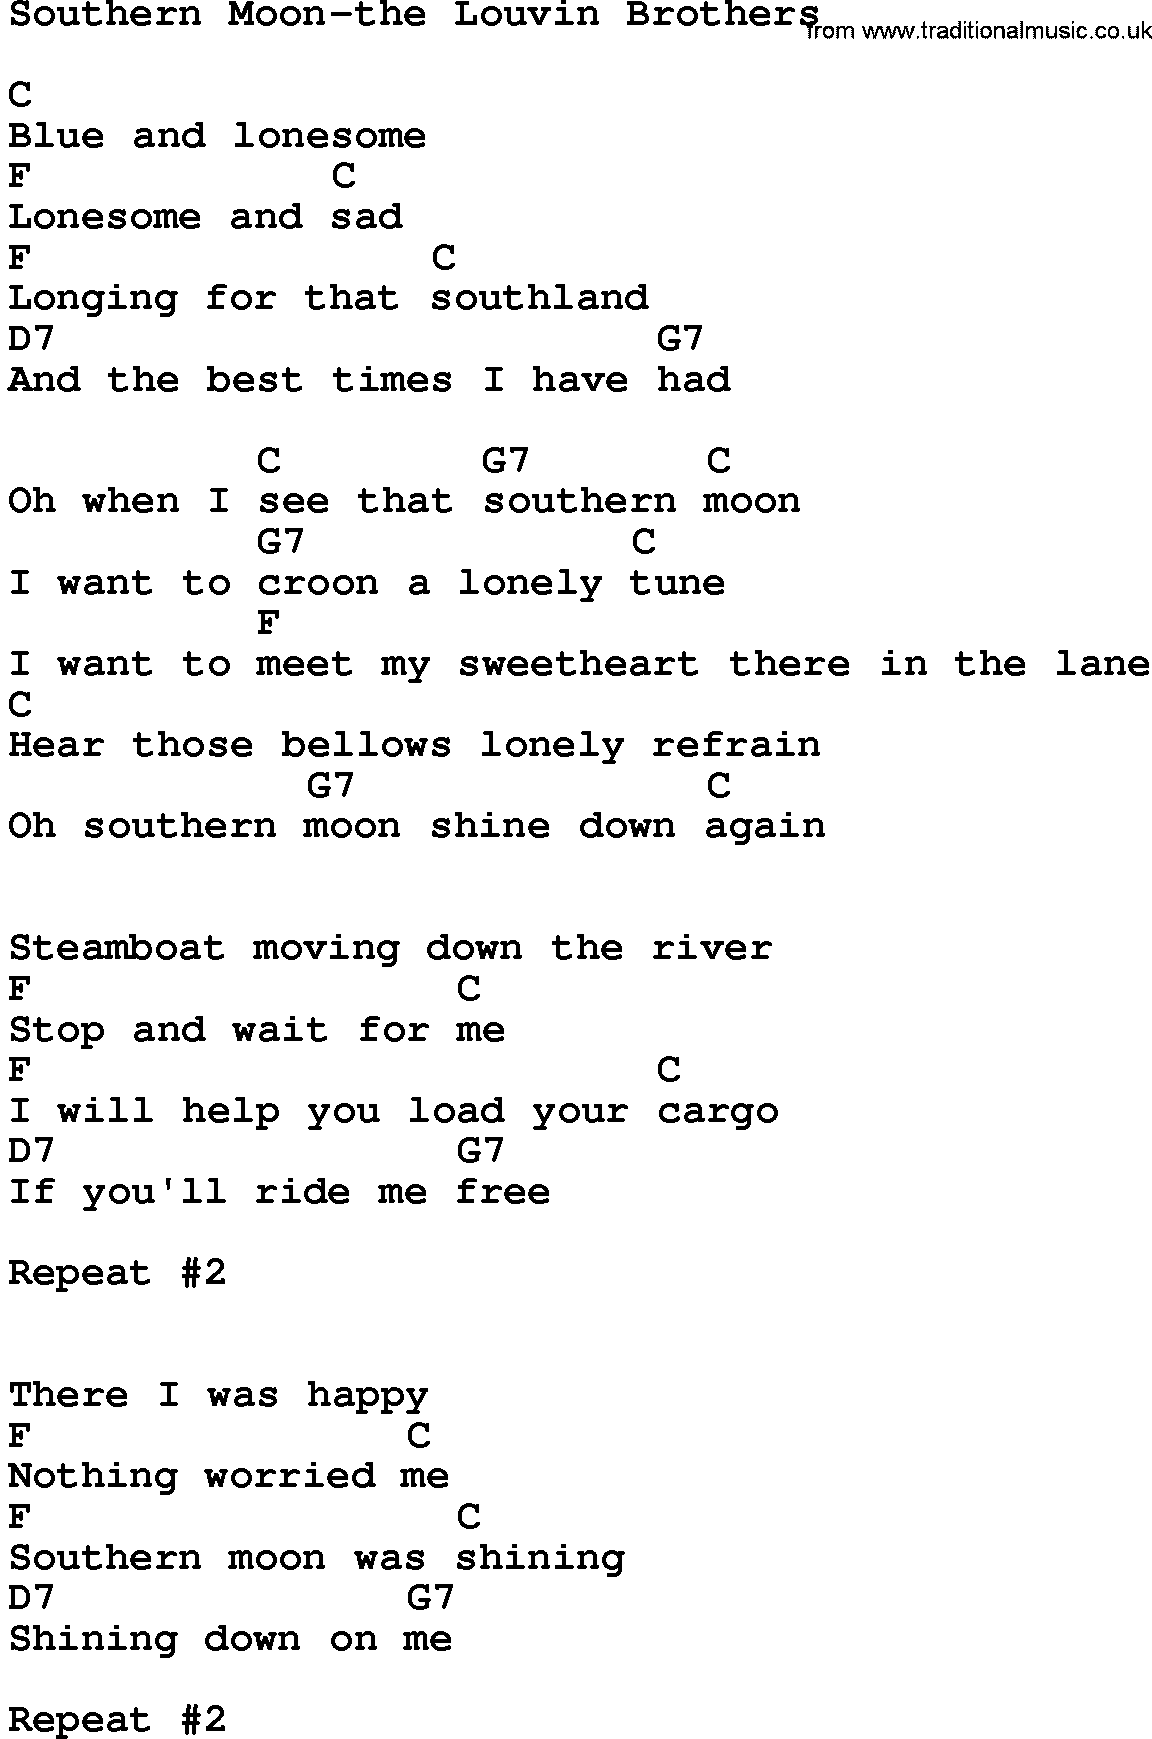 Country music song: Southern Moon-The Louvin Brothers lyrics and chords